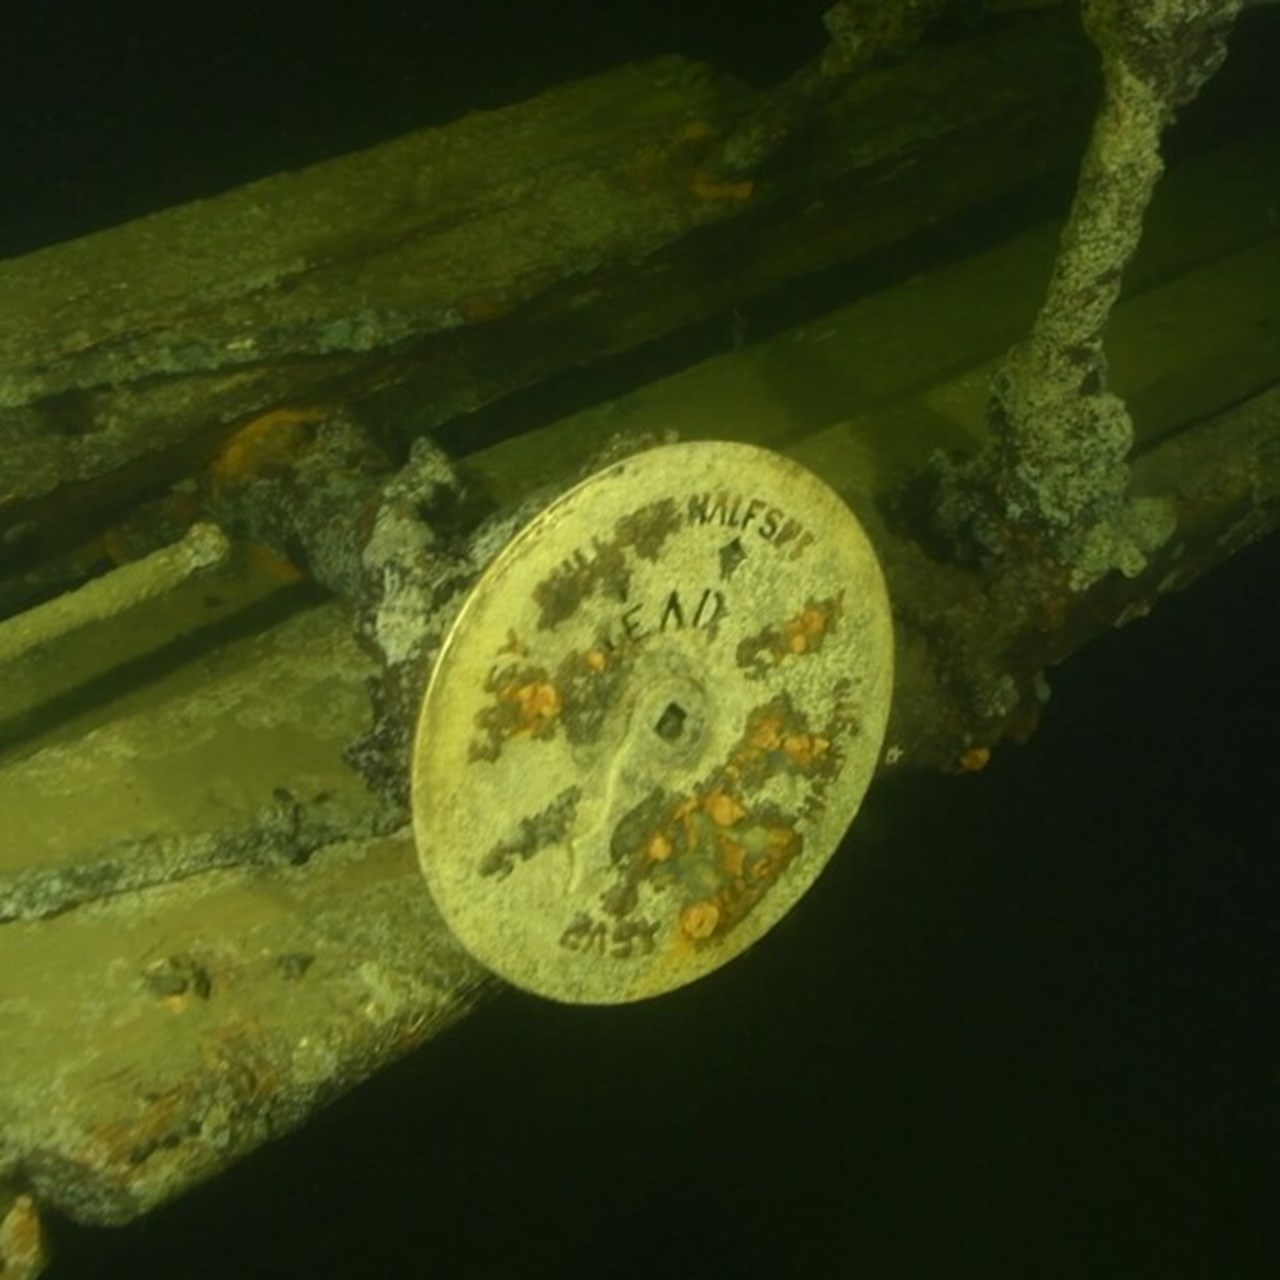 The machine telegraph on the wreck of Annie.